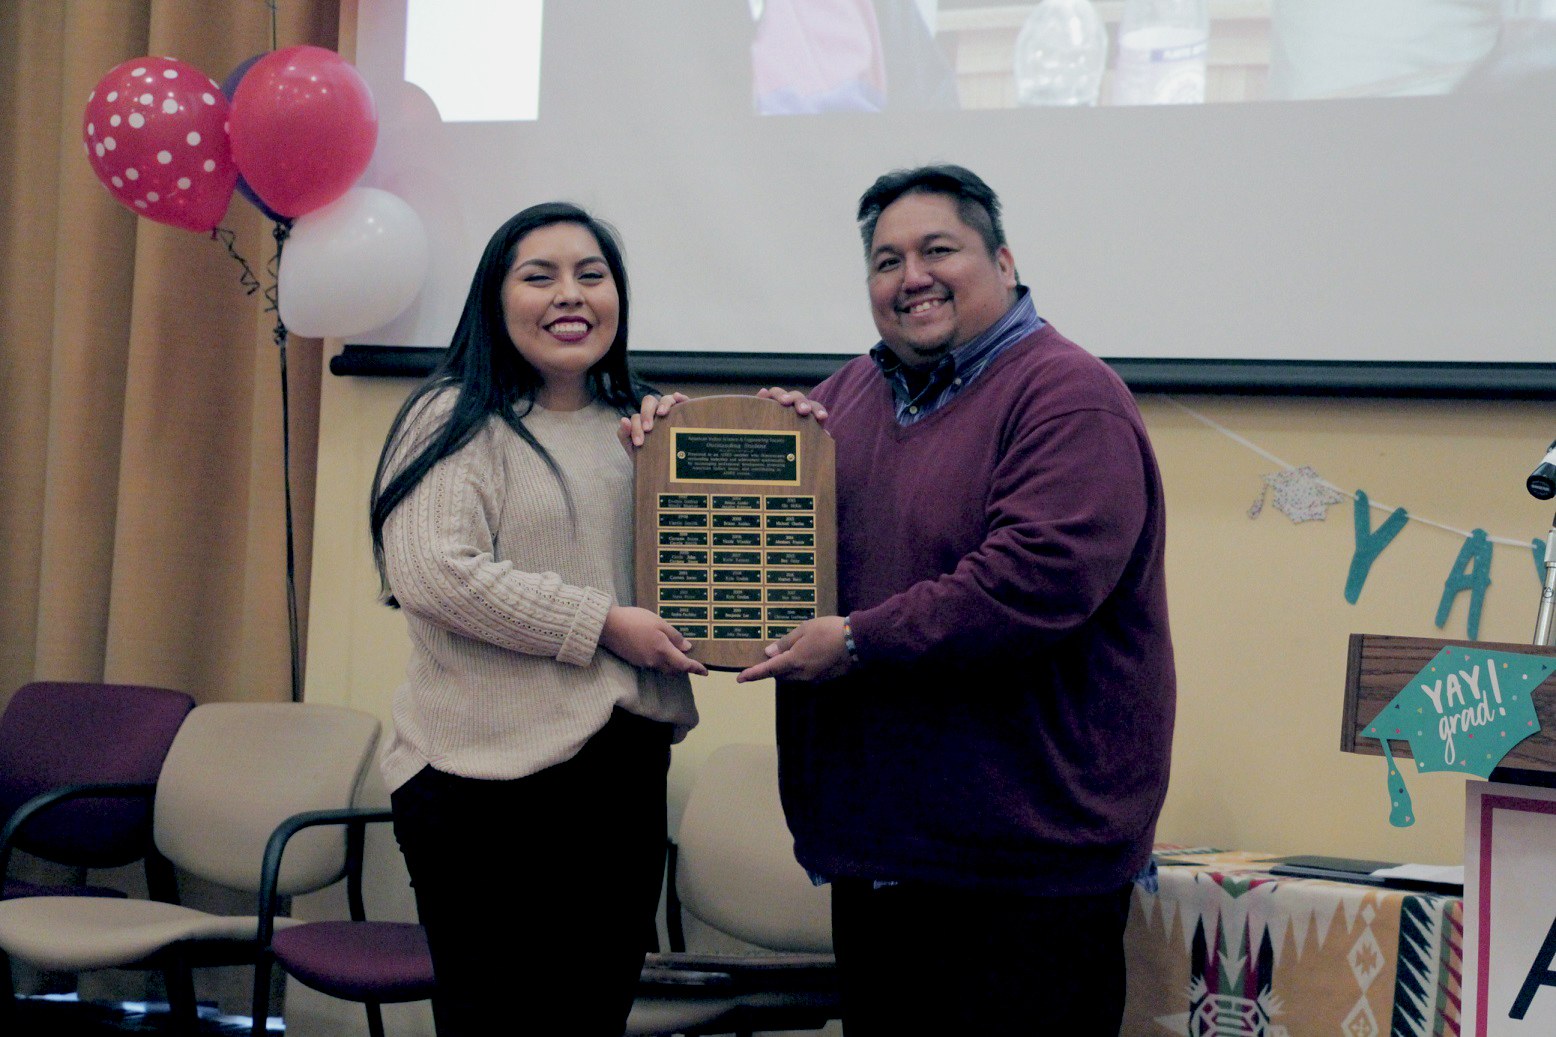 Julianne Billiman ’21 accepting an award from Vernon Miller, the former Residence Hall Director at Akwe:kon. Billiman, a Navajo student, is a recipient of the fund David Strip established to support indigenous students at Cornell. She received the 2019 American Indian Science and Engineering Society (AISES) Award.